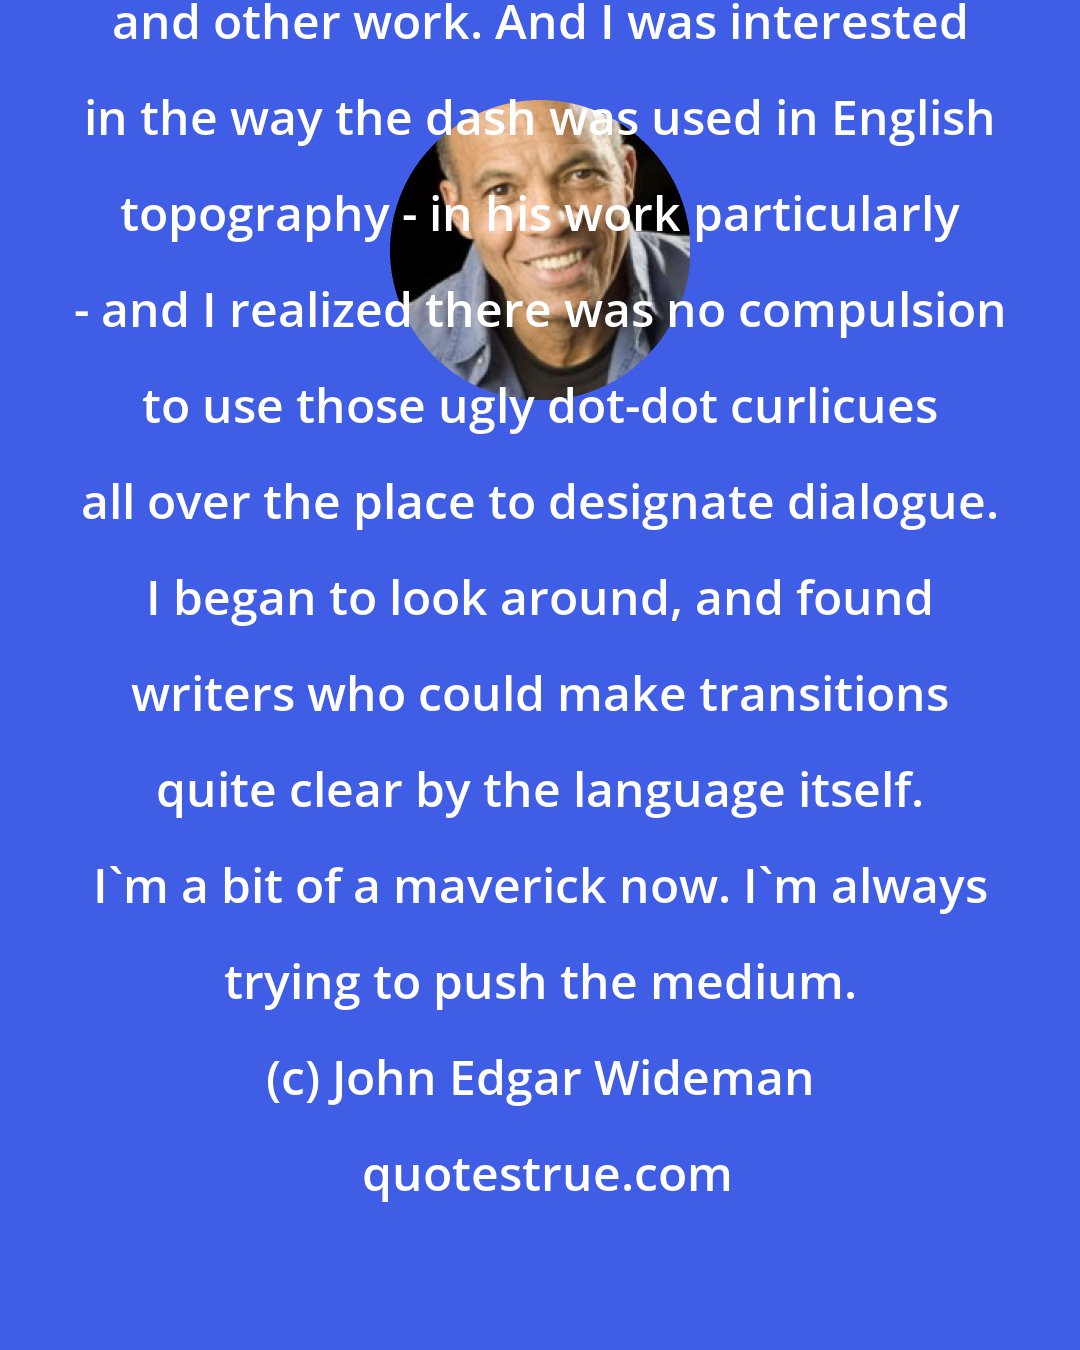 John Edgar Wideman: I really love James Joyce, Dubliners and other work. And I was interested in the way the dash was used in English topography - in his work particularly - and I realized there was no compulsion to use those ugly dot-dot curlicues all over the place to designate dialogue. I began to look around, and found writers who could make transitions quite clear by the language itself. I'm a bit of a maverick now. I'm always trying to push the medium.